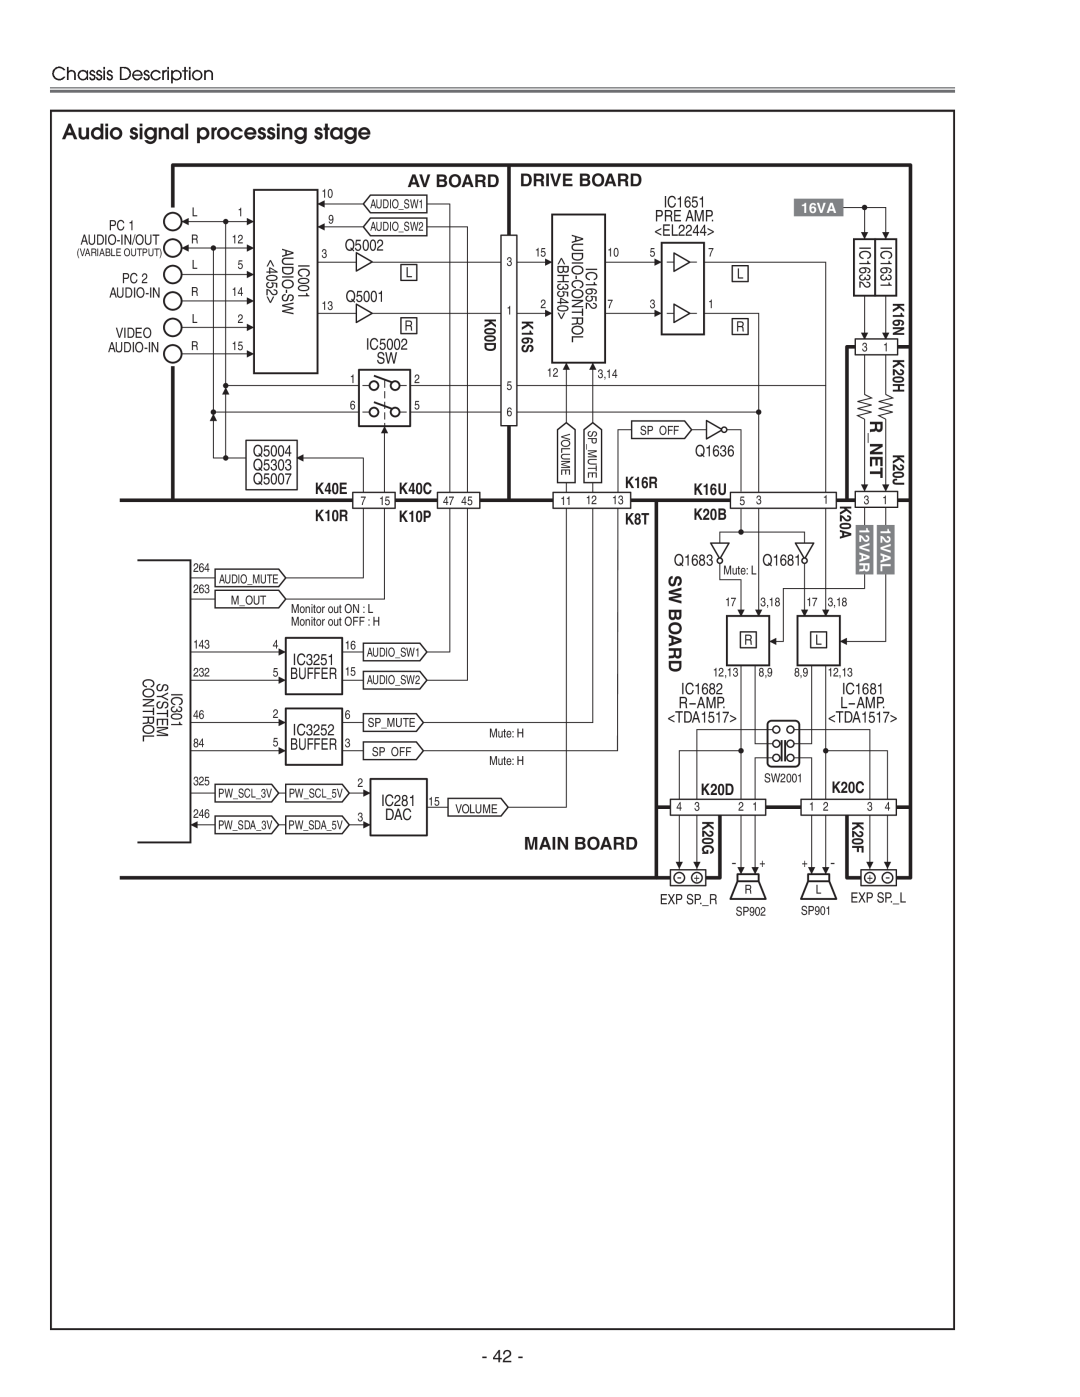 Eiki LC-X71 LC-X71L service manual Audio signal processing stage, Chassis Description 